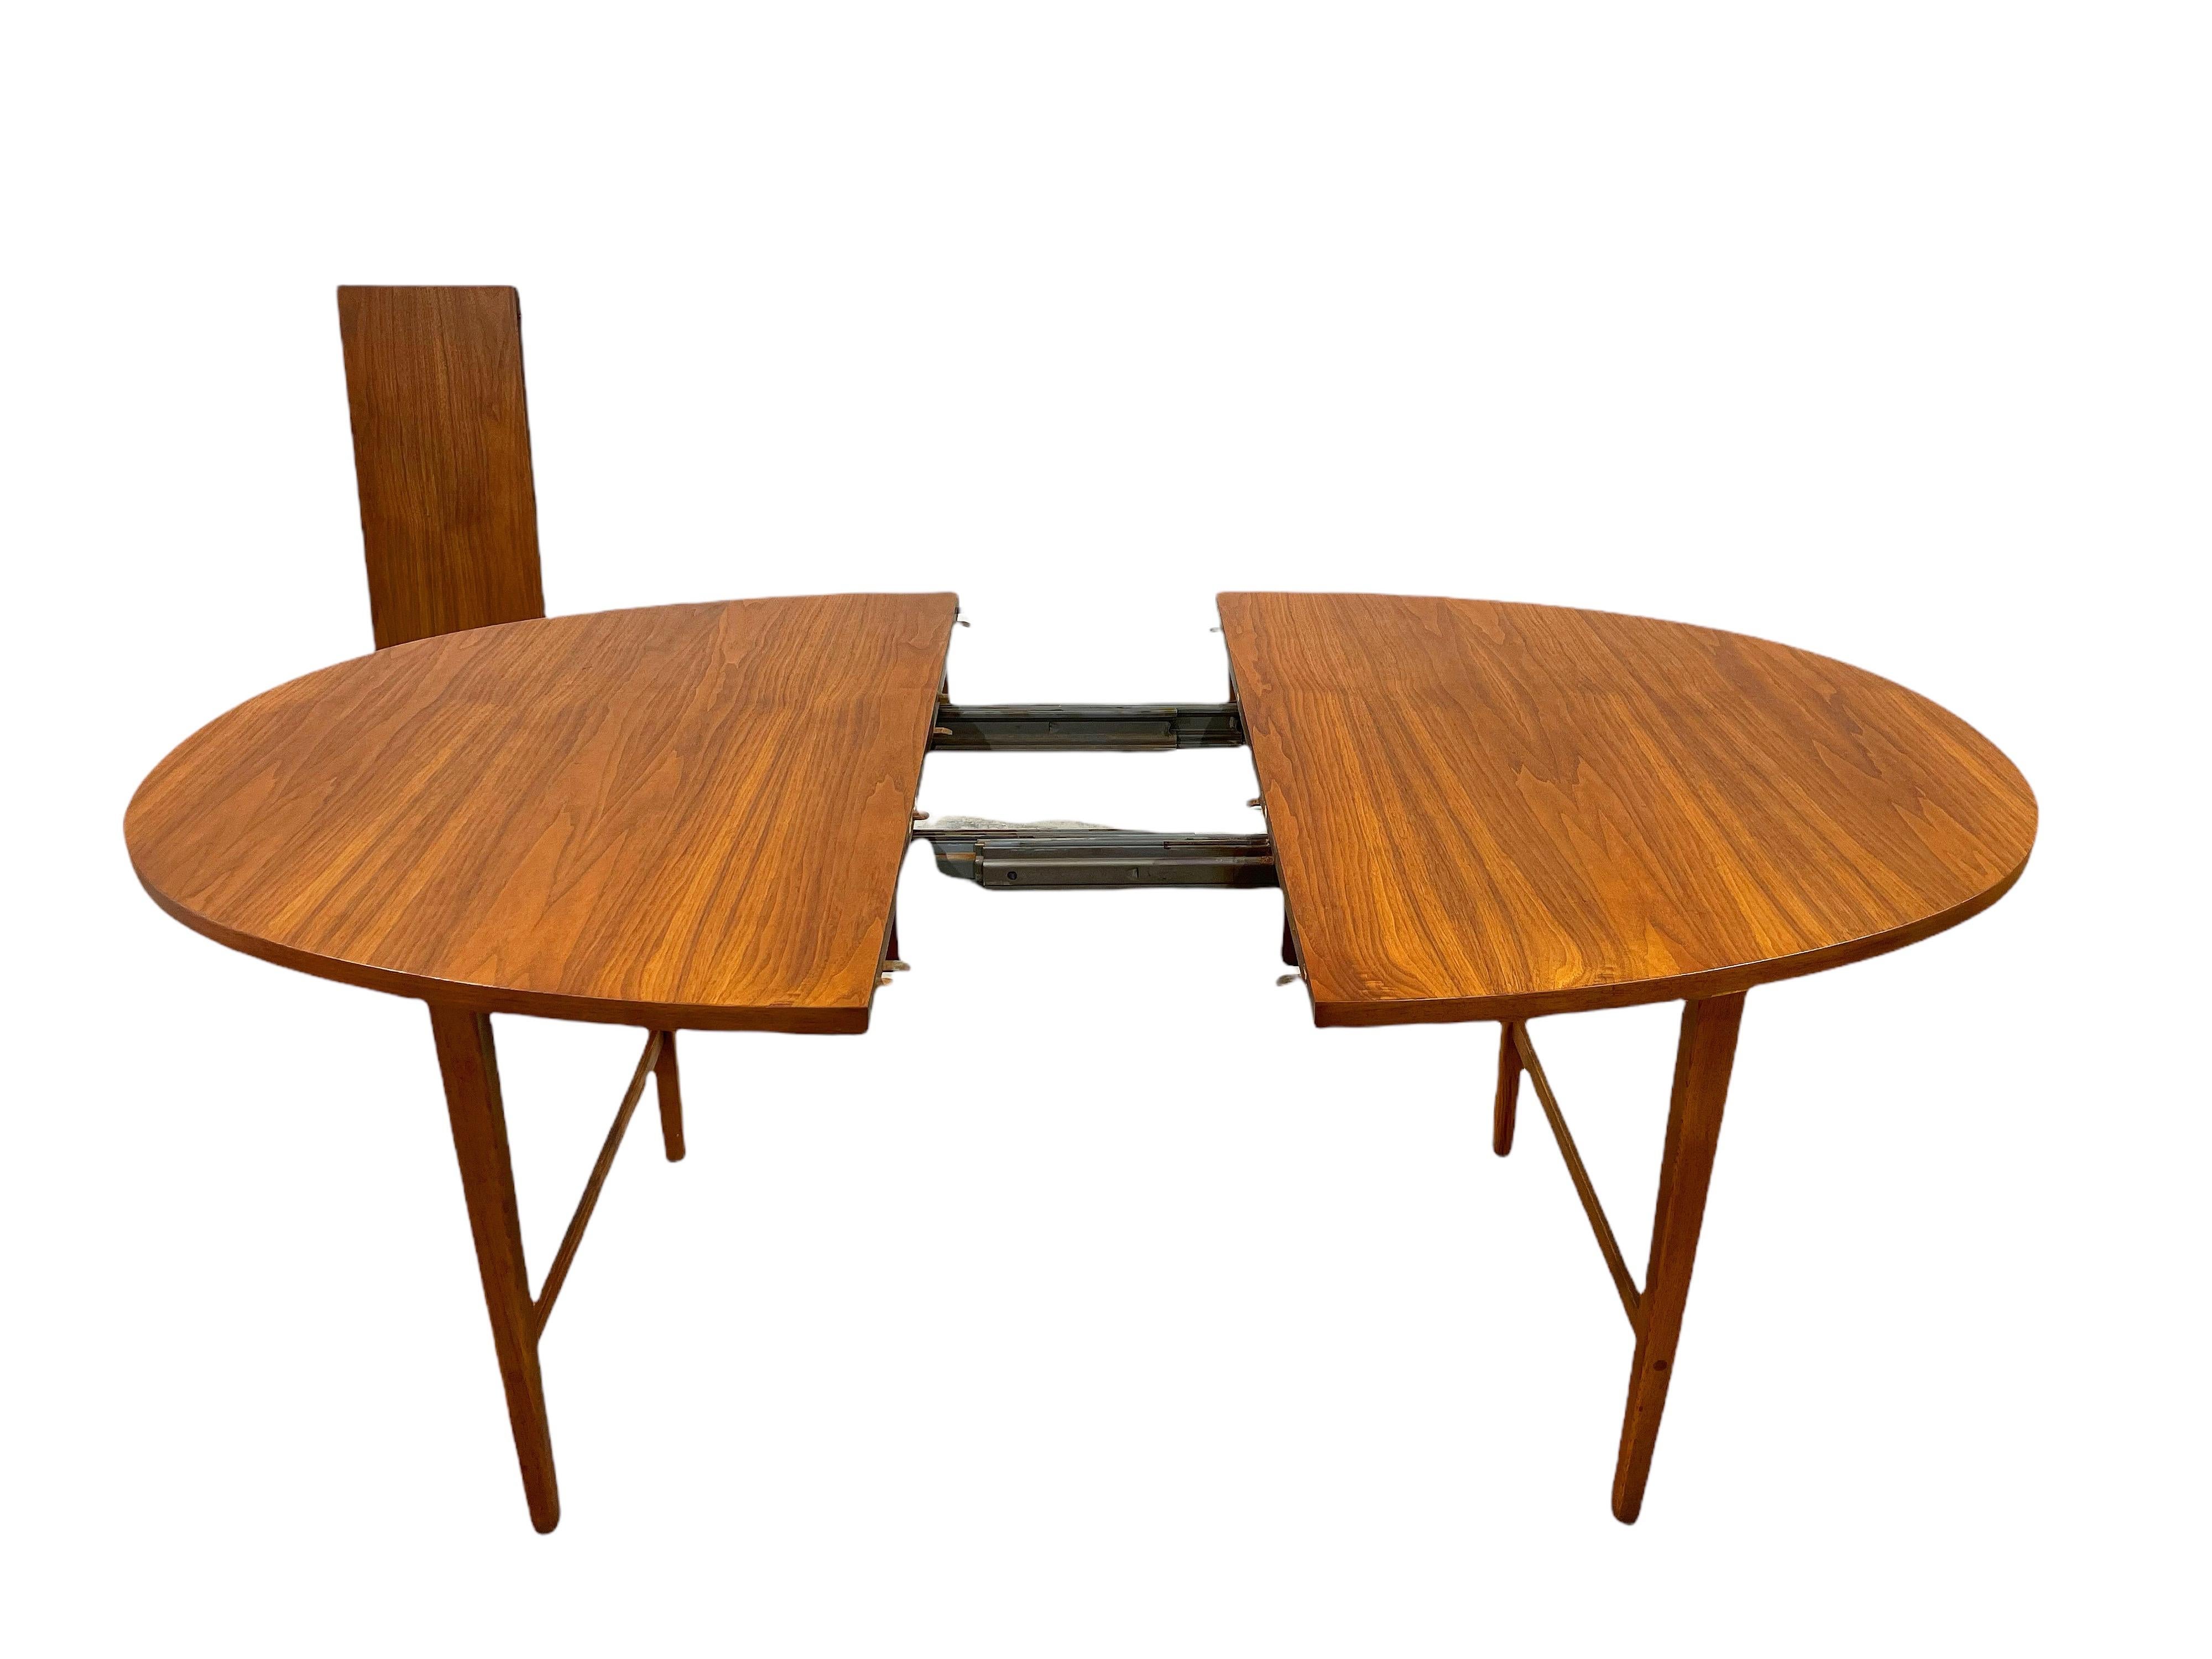 American Midcentury Modern Paul McCobb Walnut Oval Dining Table, Components Line